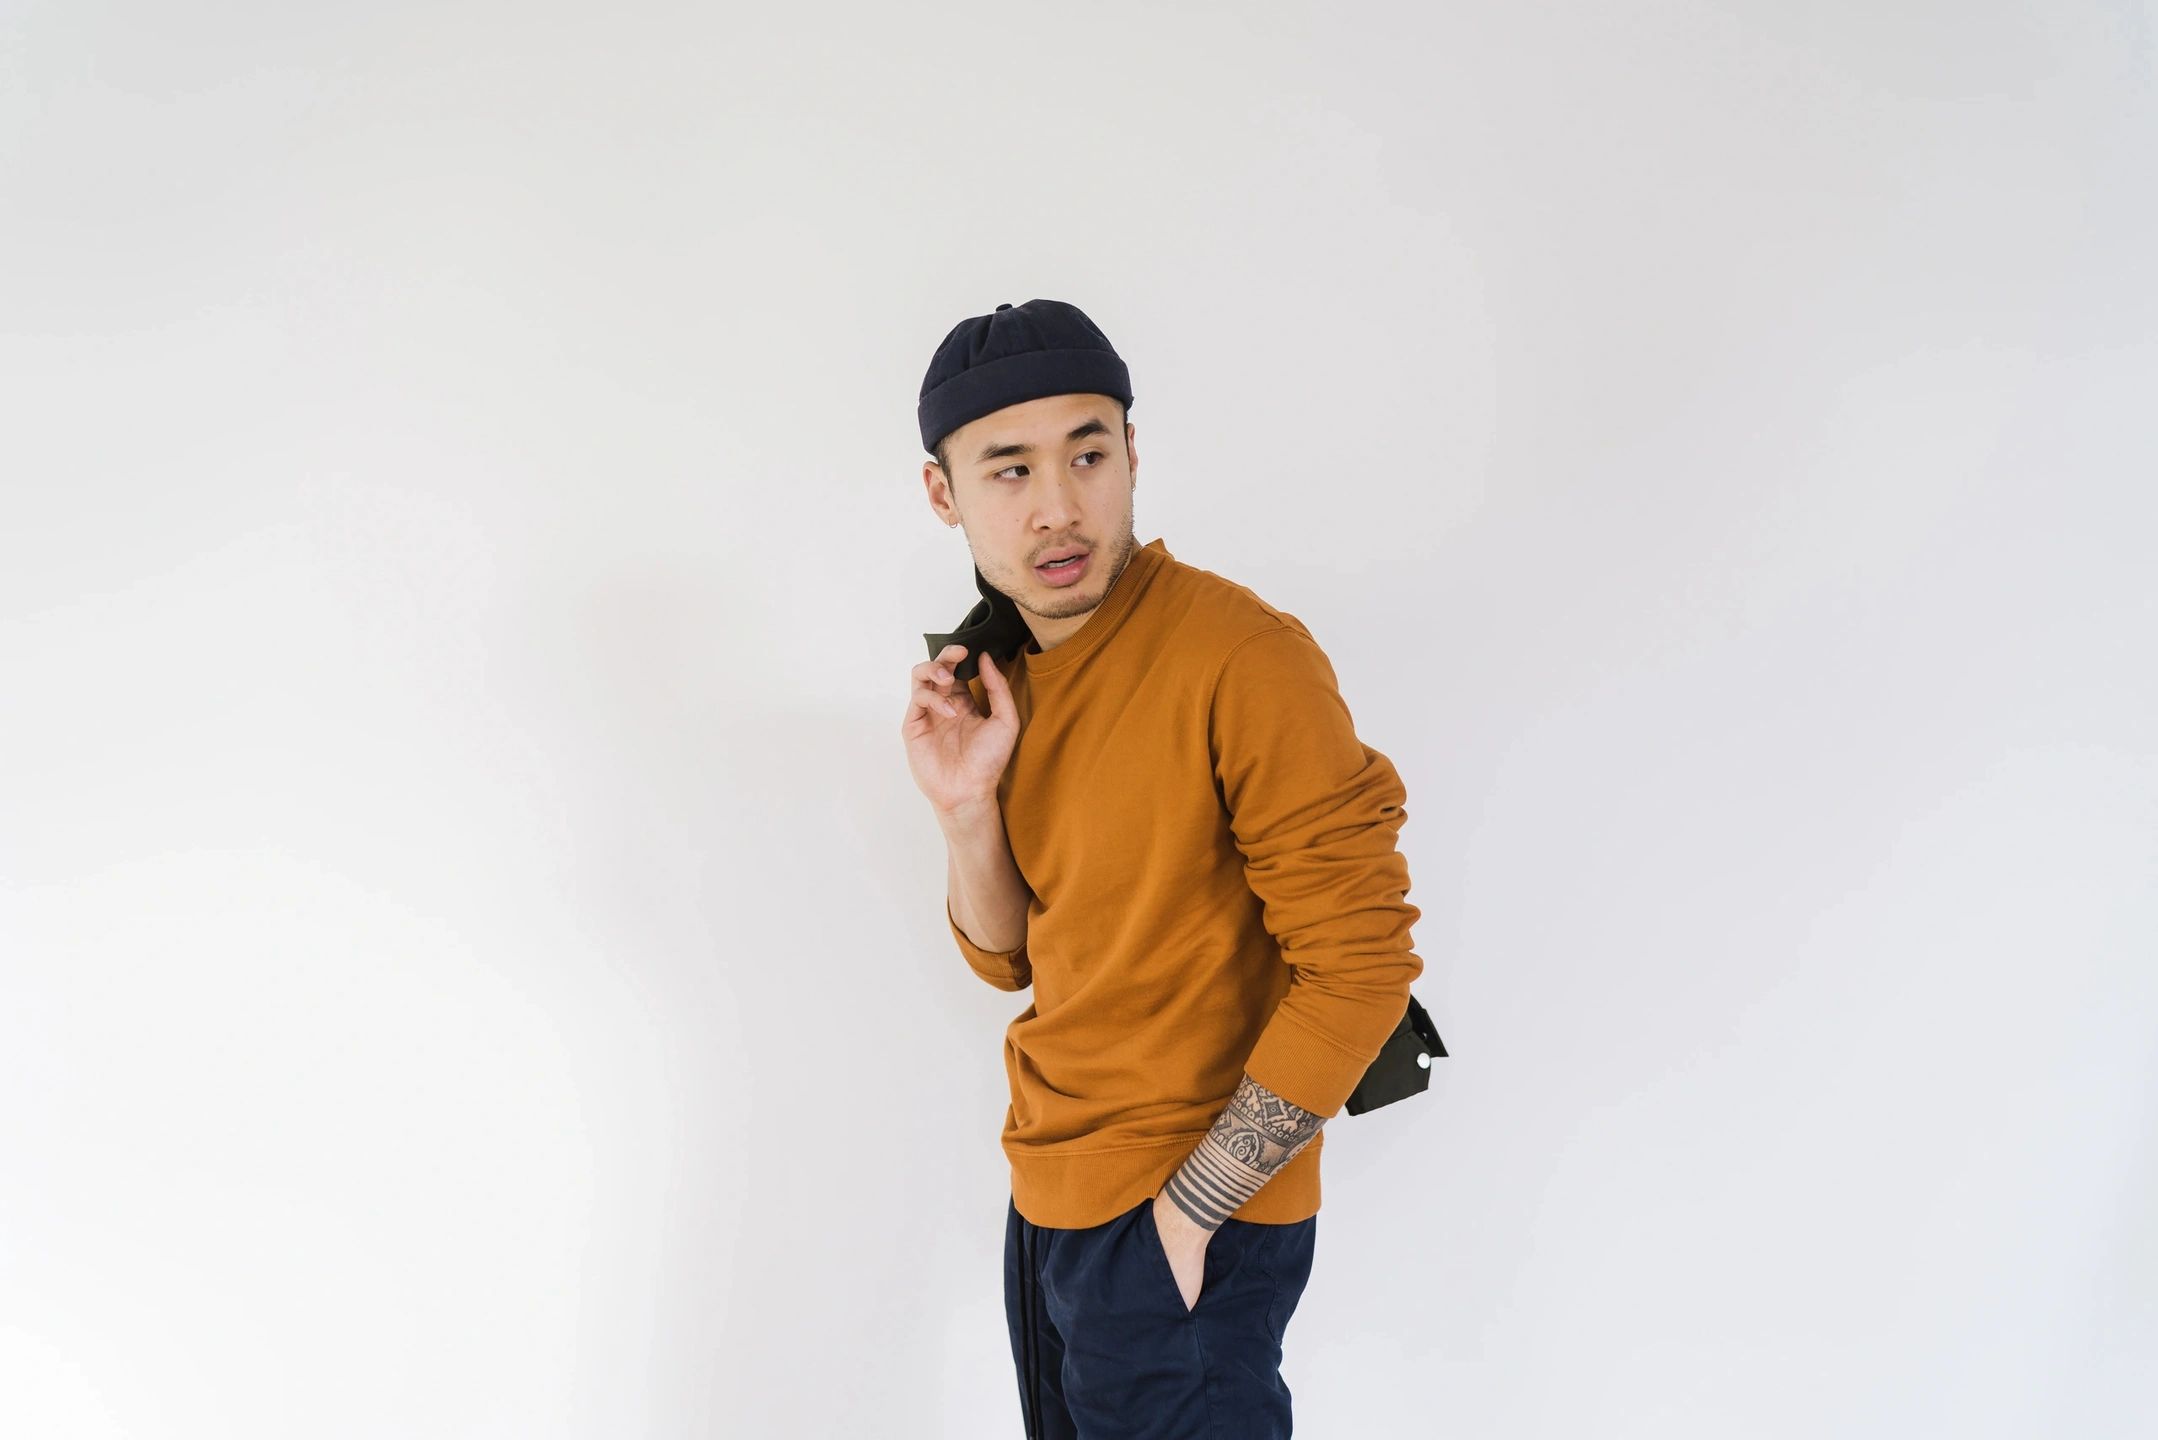 A young man in an orange sweater and blue pants poses against a plain white background. He is wearing a black beanie and has a tattoo on his forearm. His right hand is raised near his face, and he gazes to his left with a thoughtful expression